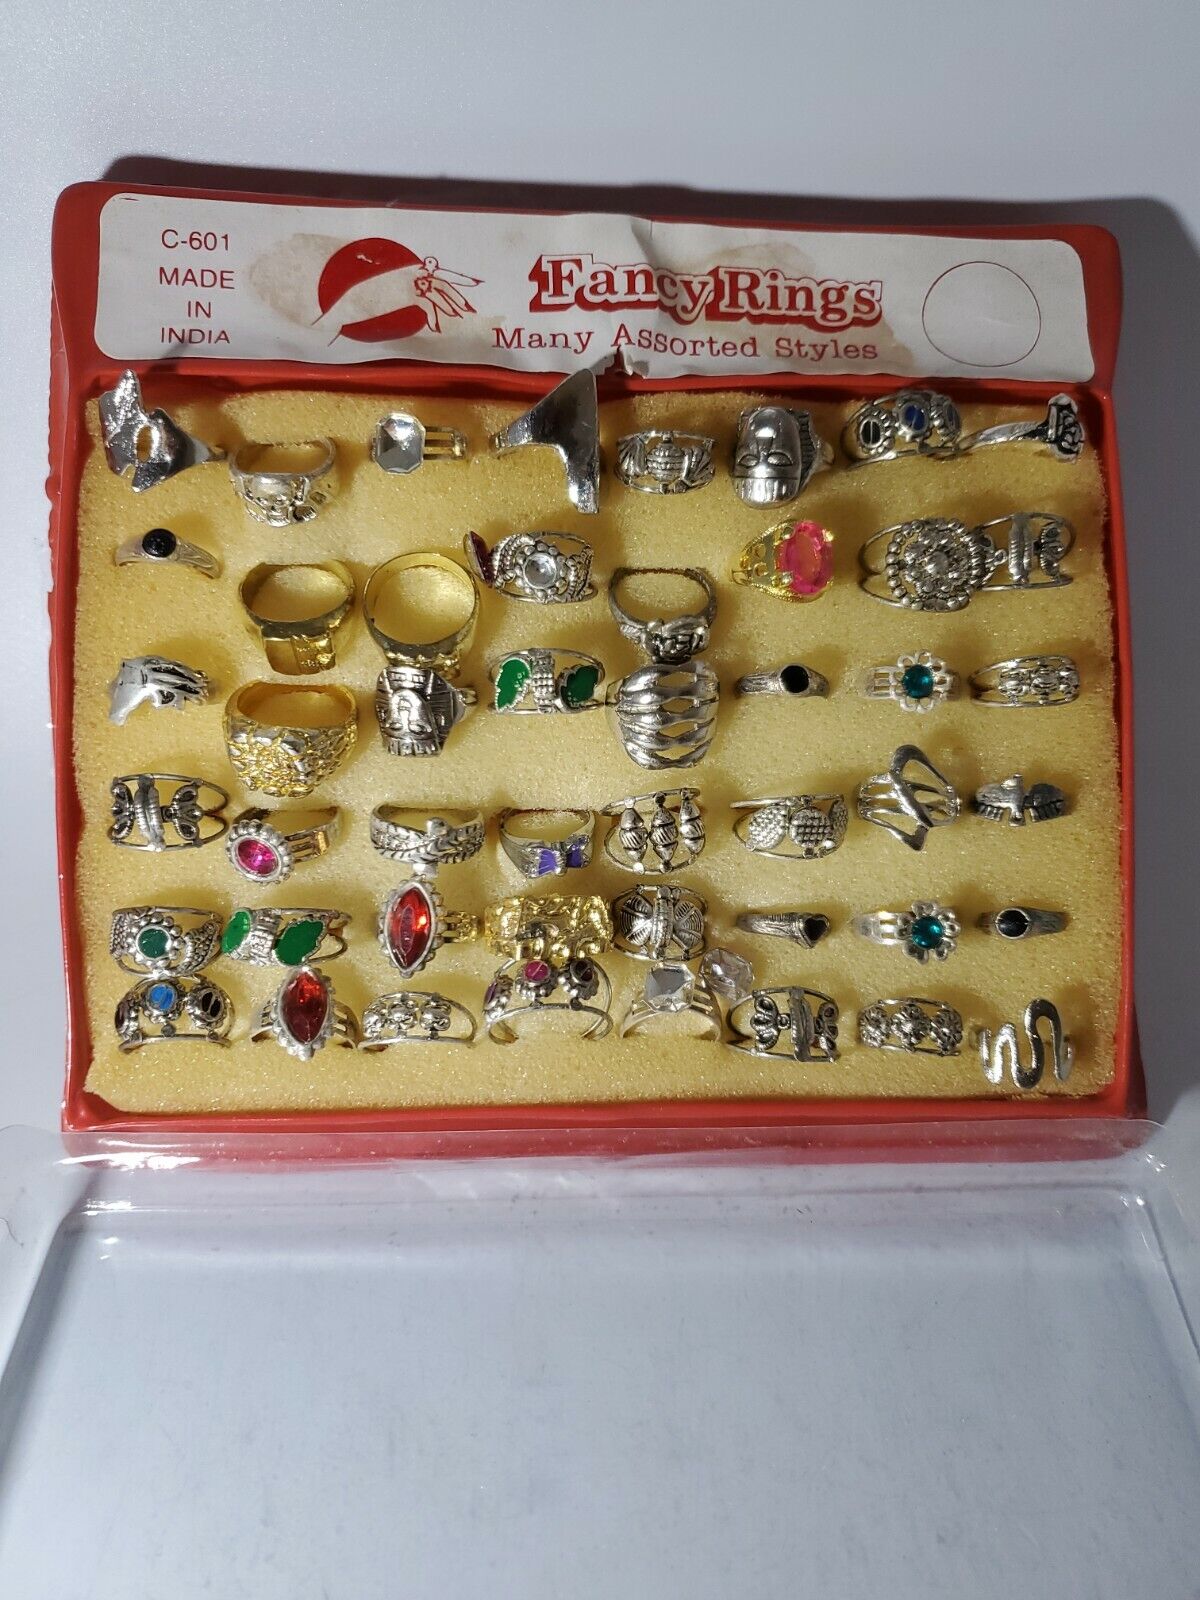 Vintage Assorted Fancy Rings Full Store Display Made in India RARE 48 RINGS 